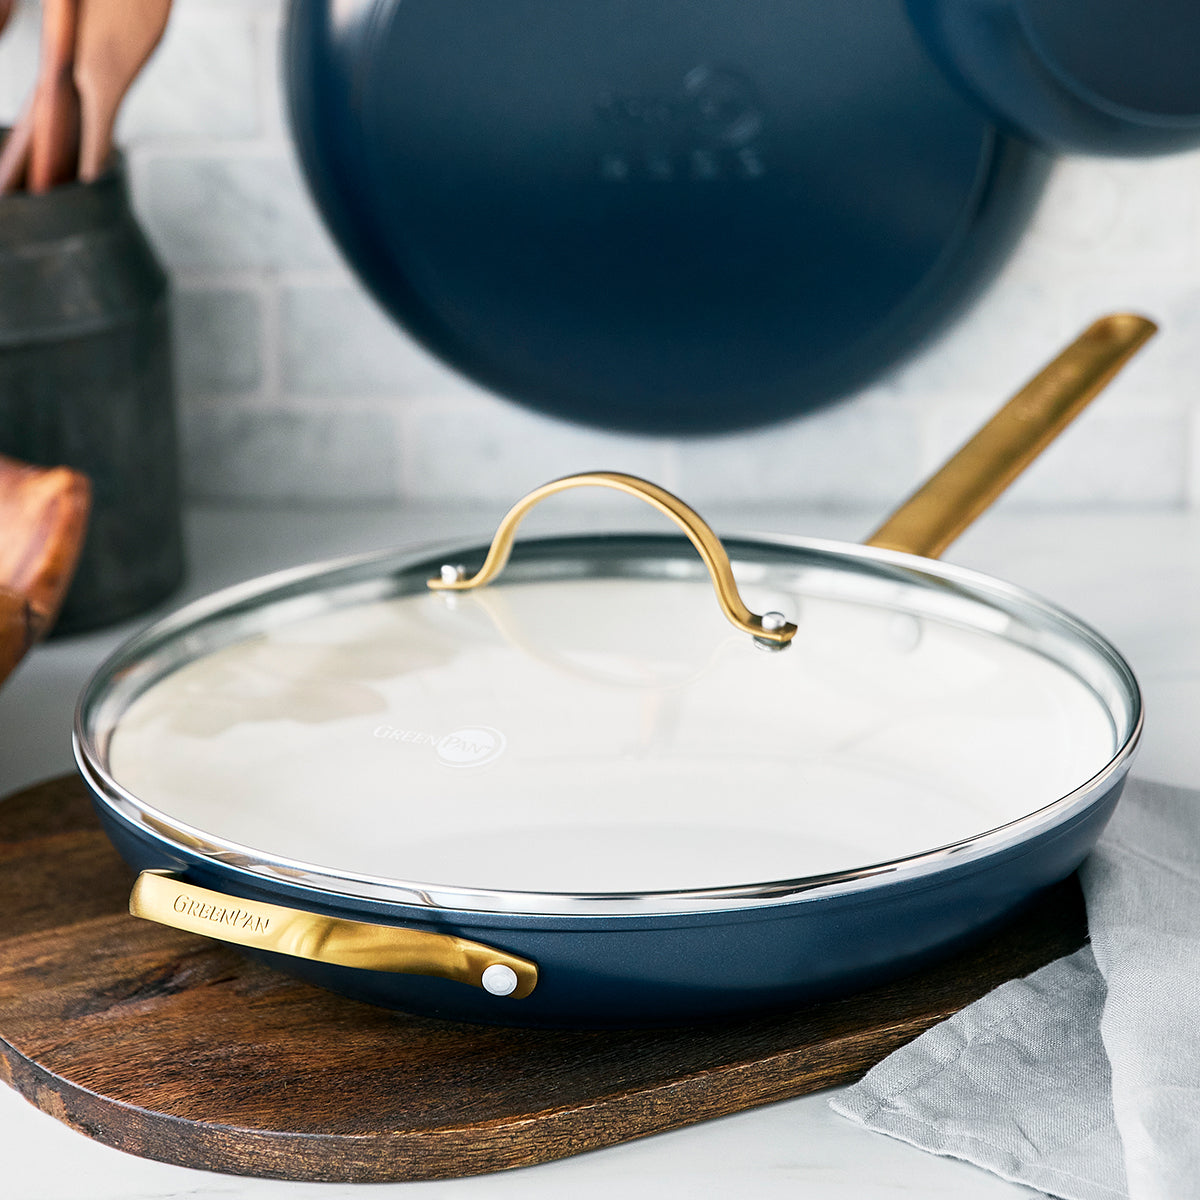 Reserve Ceramic Nonstick 12 Frypan with Helper Handle and Lid | Twilight  with Gold-Tone Handles